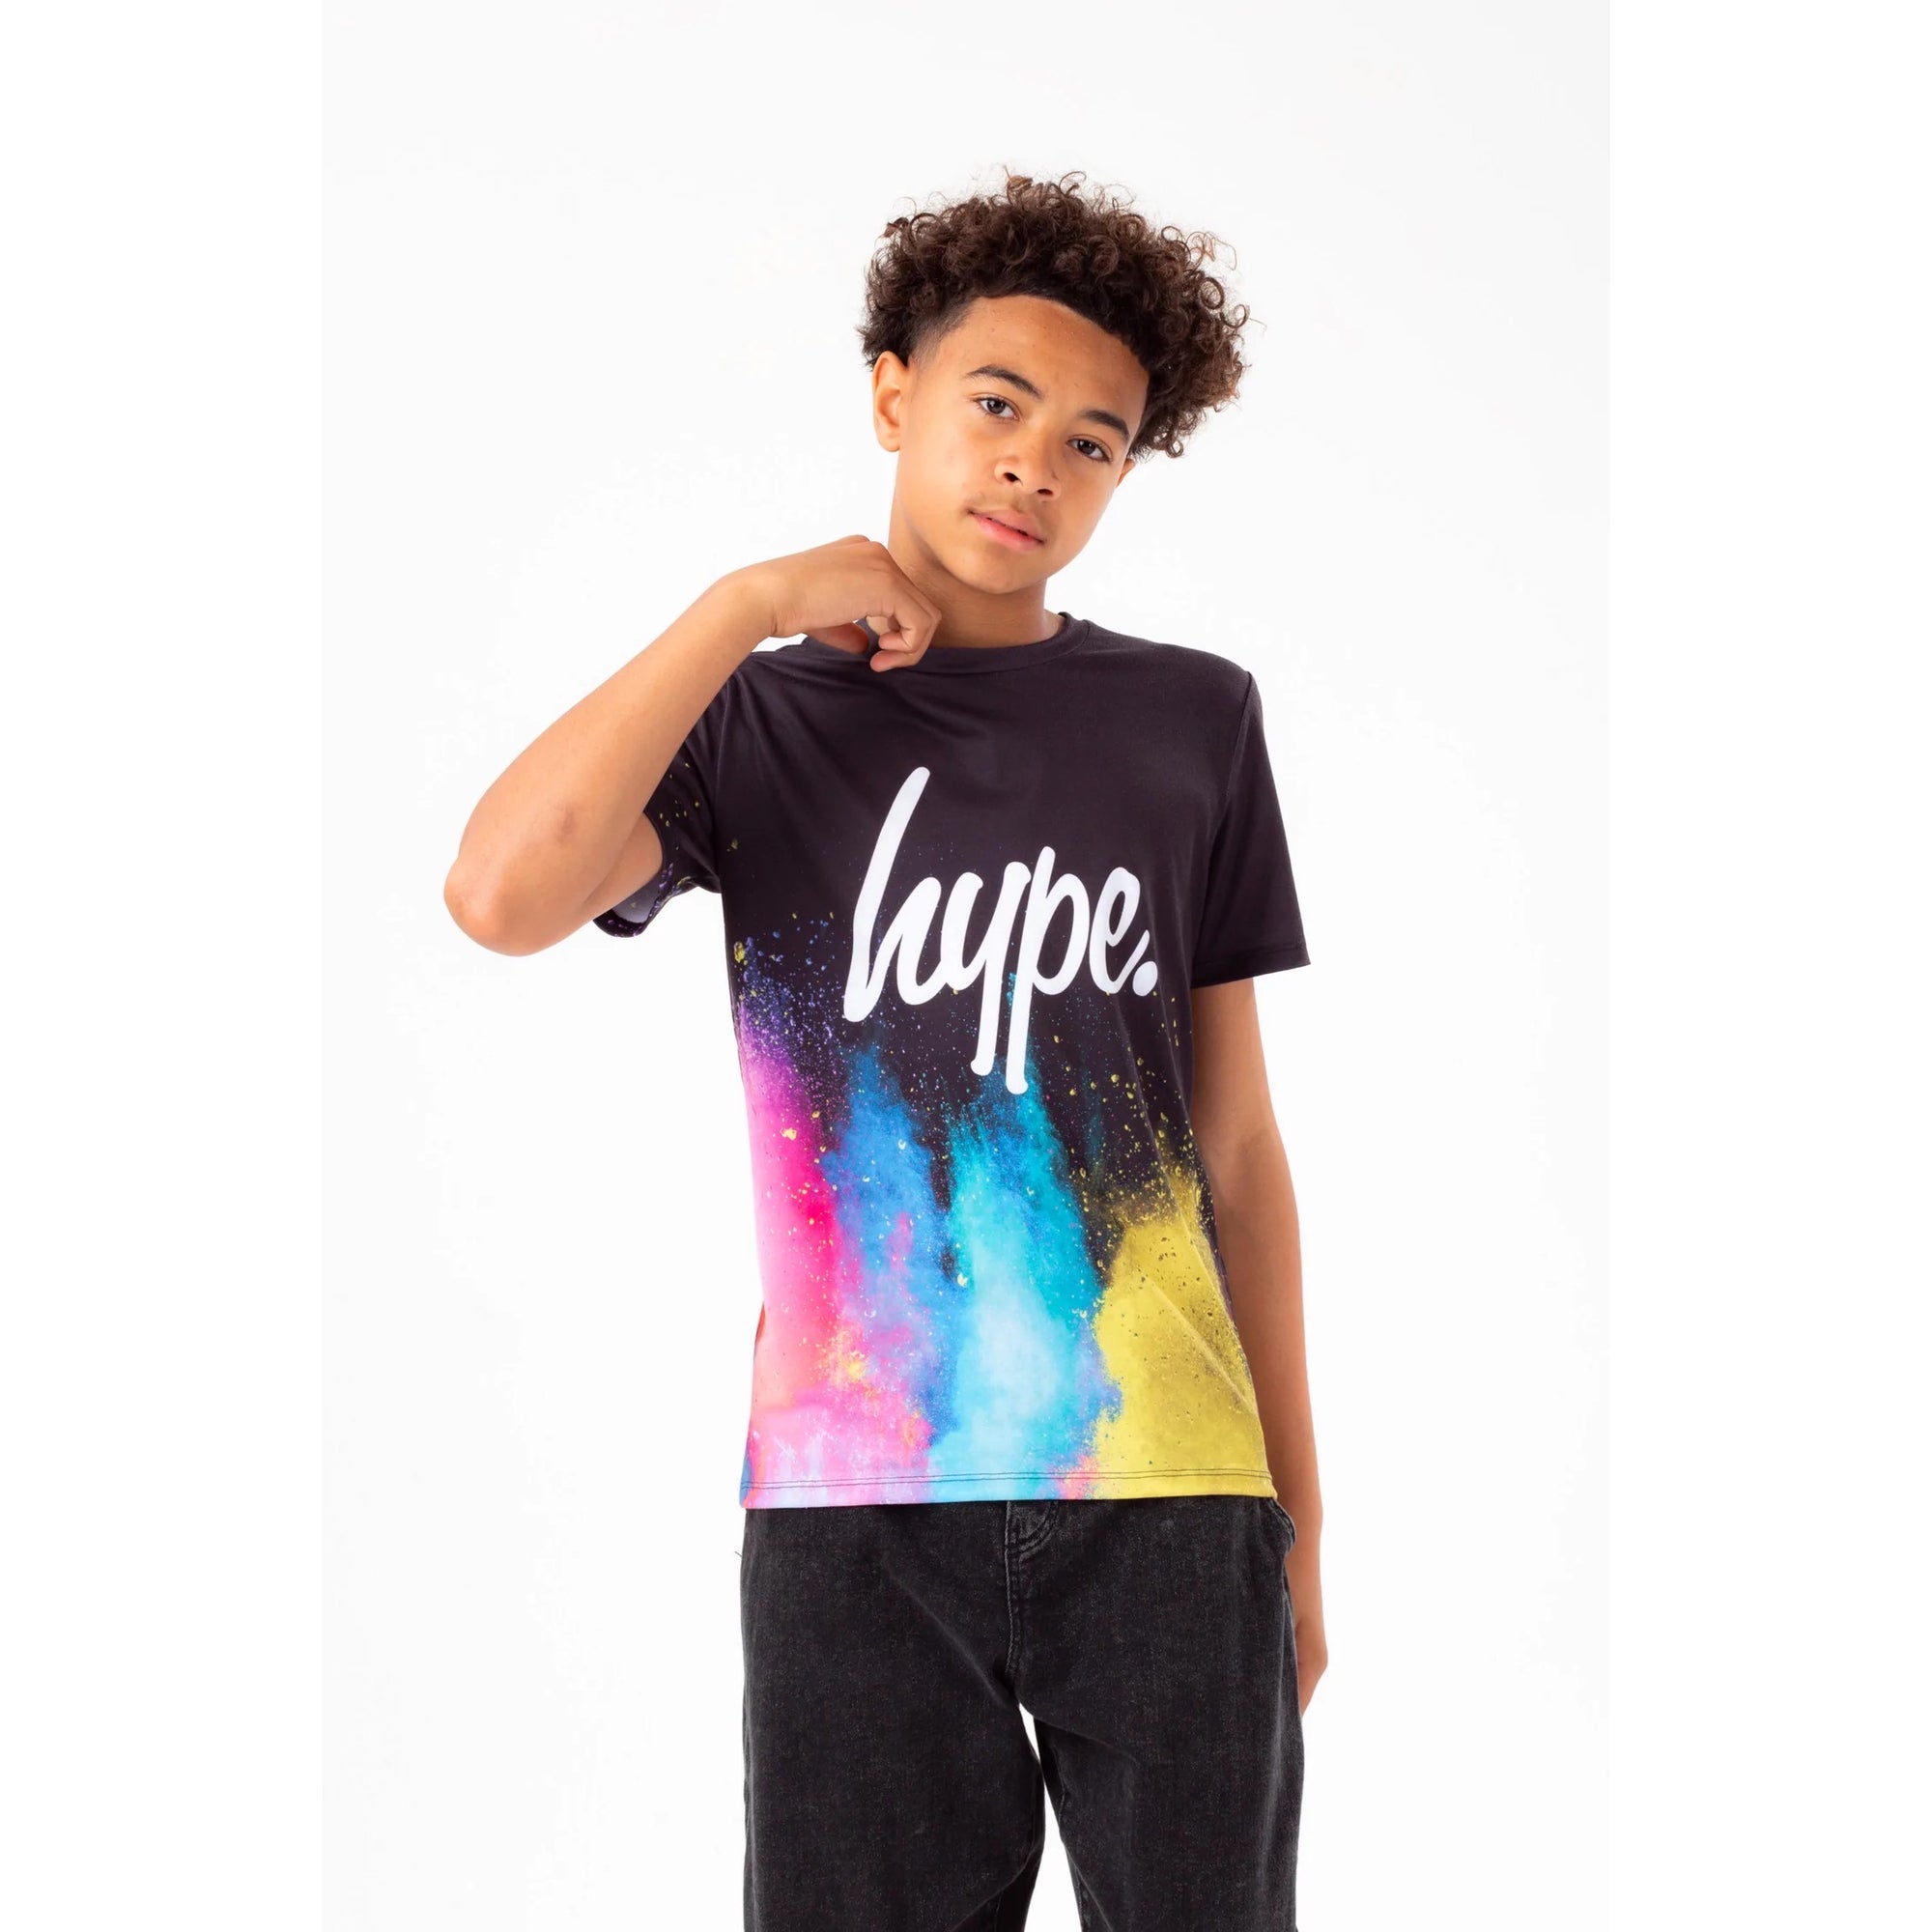 Hype Colour Explosion T-Shirt Yvlr356 Clothing 9/10YRS / Multi,11/12YRS / Multi,13YRS / Multi,14YRS / Multi